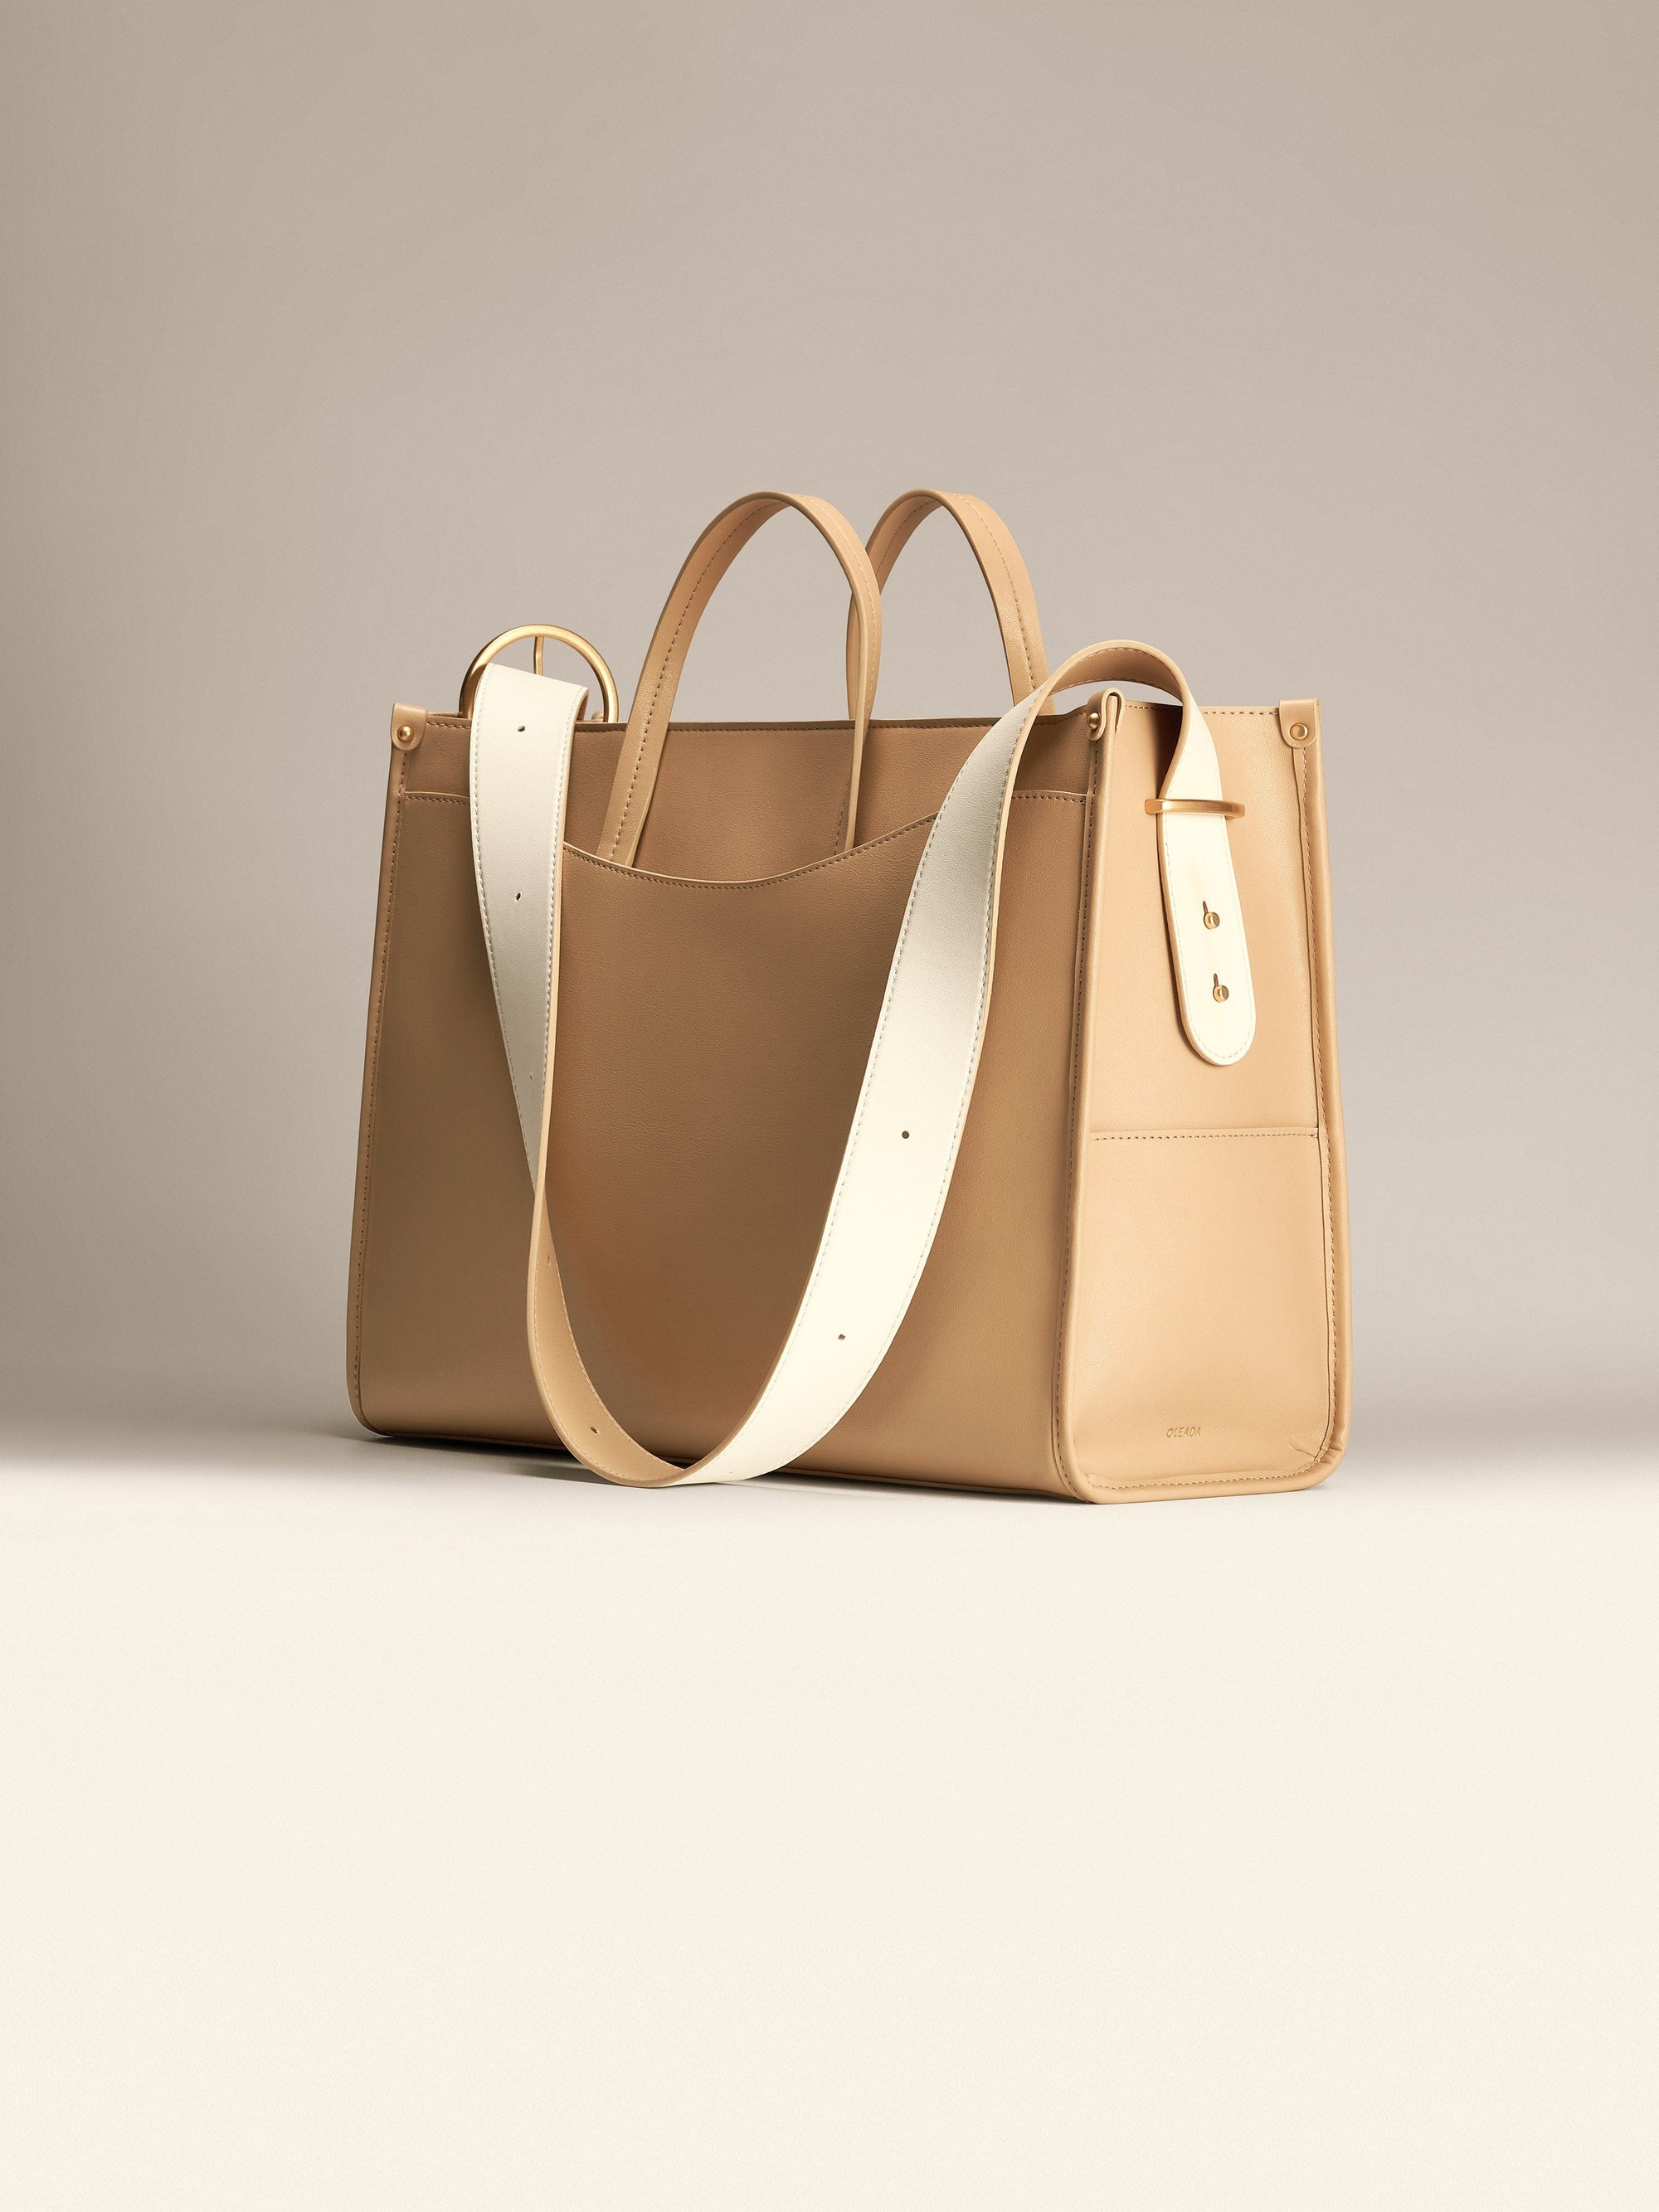 Tote Bag - Waterproof Corporate Work Bag for Women - Light Beige - Leather - Fit Up to A 16 inch Laptop | Oleada